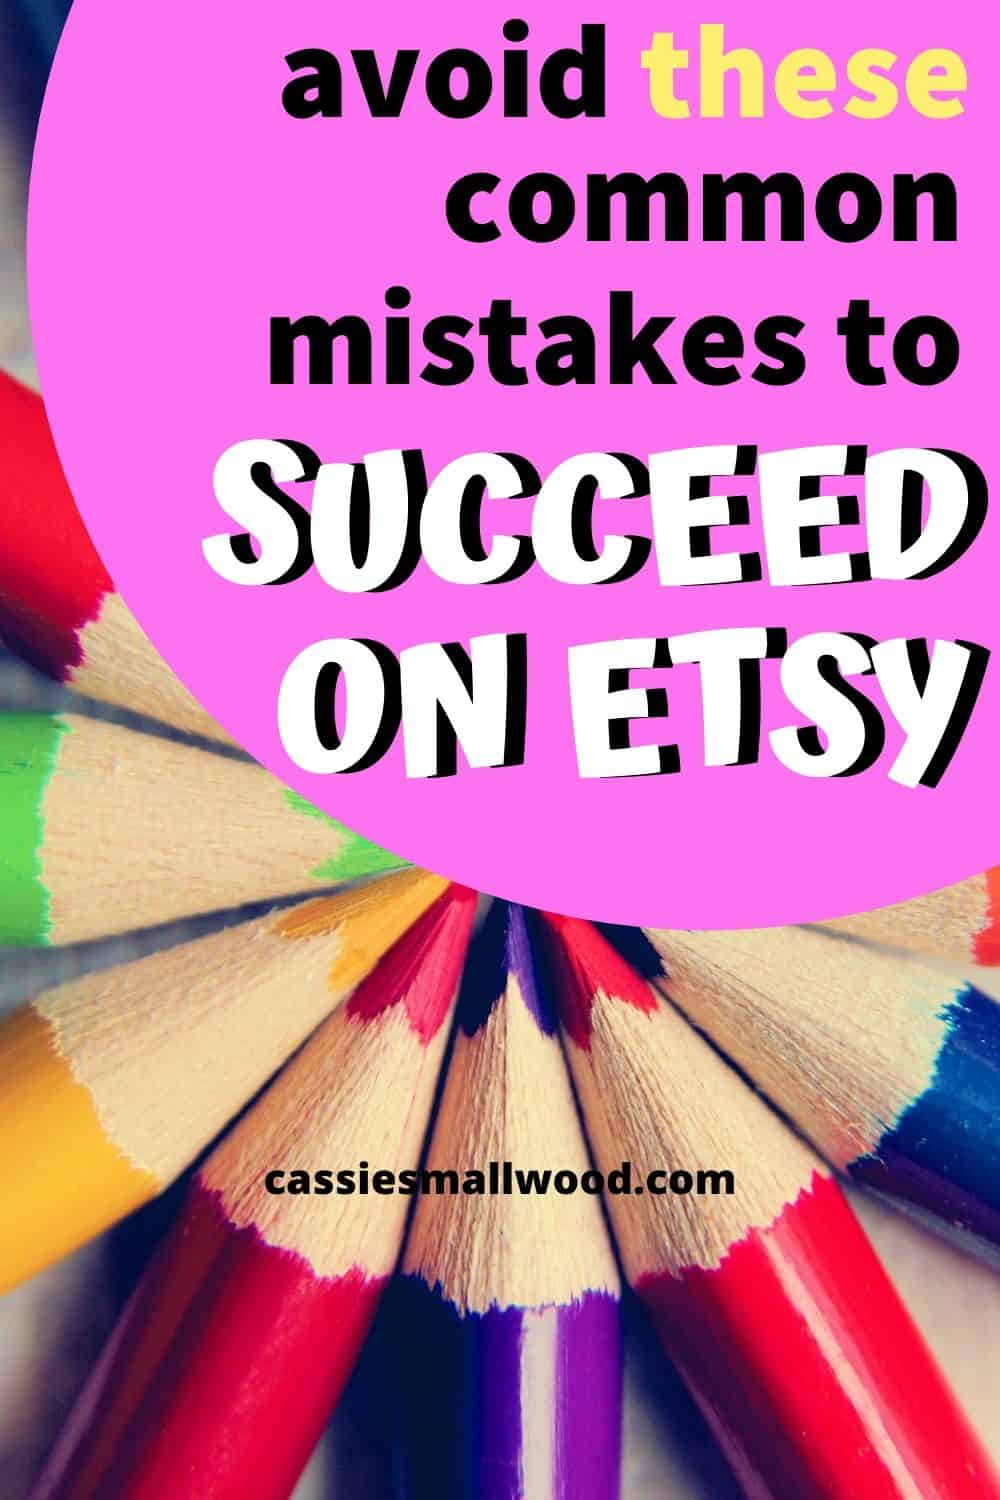 How to start selling on Etsy THE RIGHT WAY! Avoid making these mistakes selling your handmade crafts online so you can make money working from home and have a small business you love selling crafts. Stay at home moms want to make extra cash with a craft business to earn their own income. Sell your handmade items on Etsy with these tips and ideas to avoid common problems. #etsysellertips #sellingonetsy #sellinghandmadecrafts 